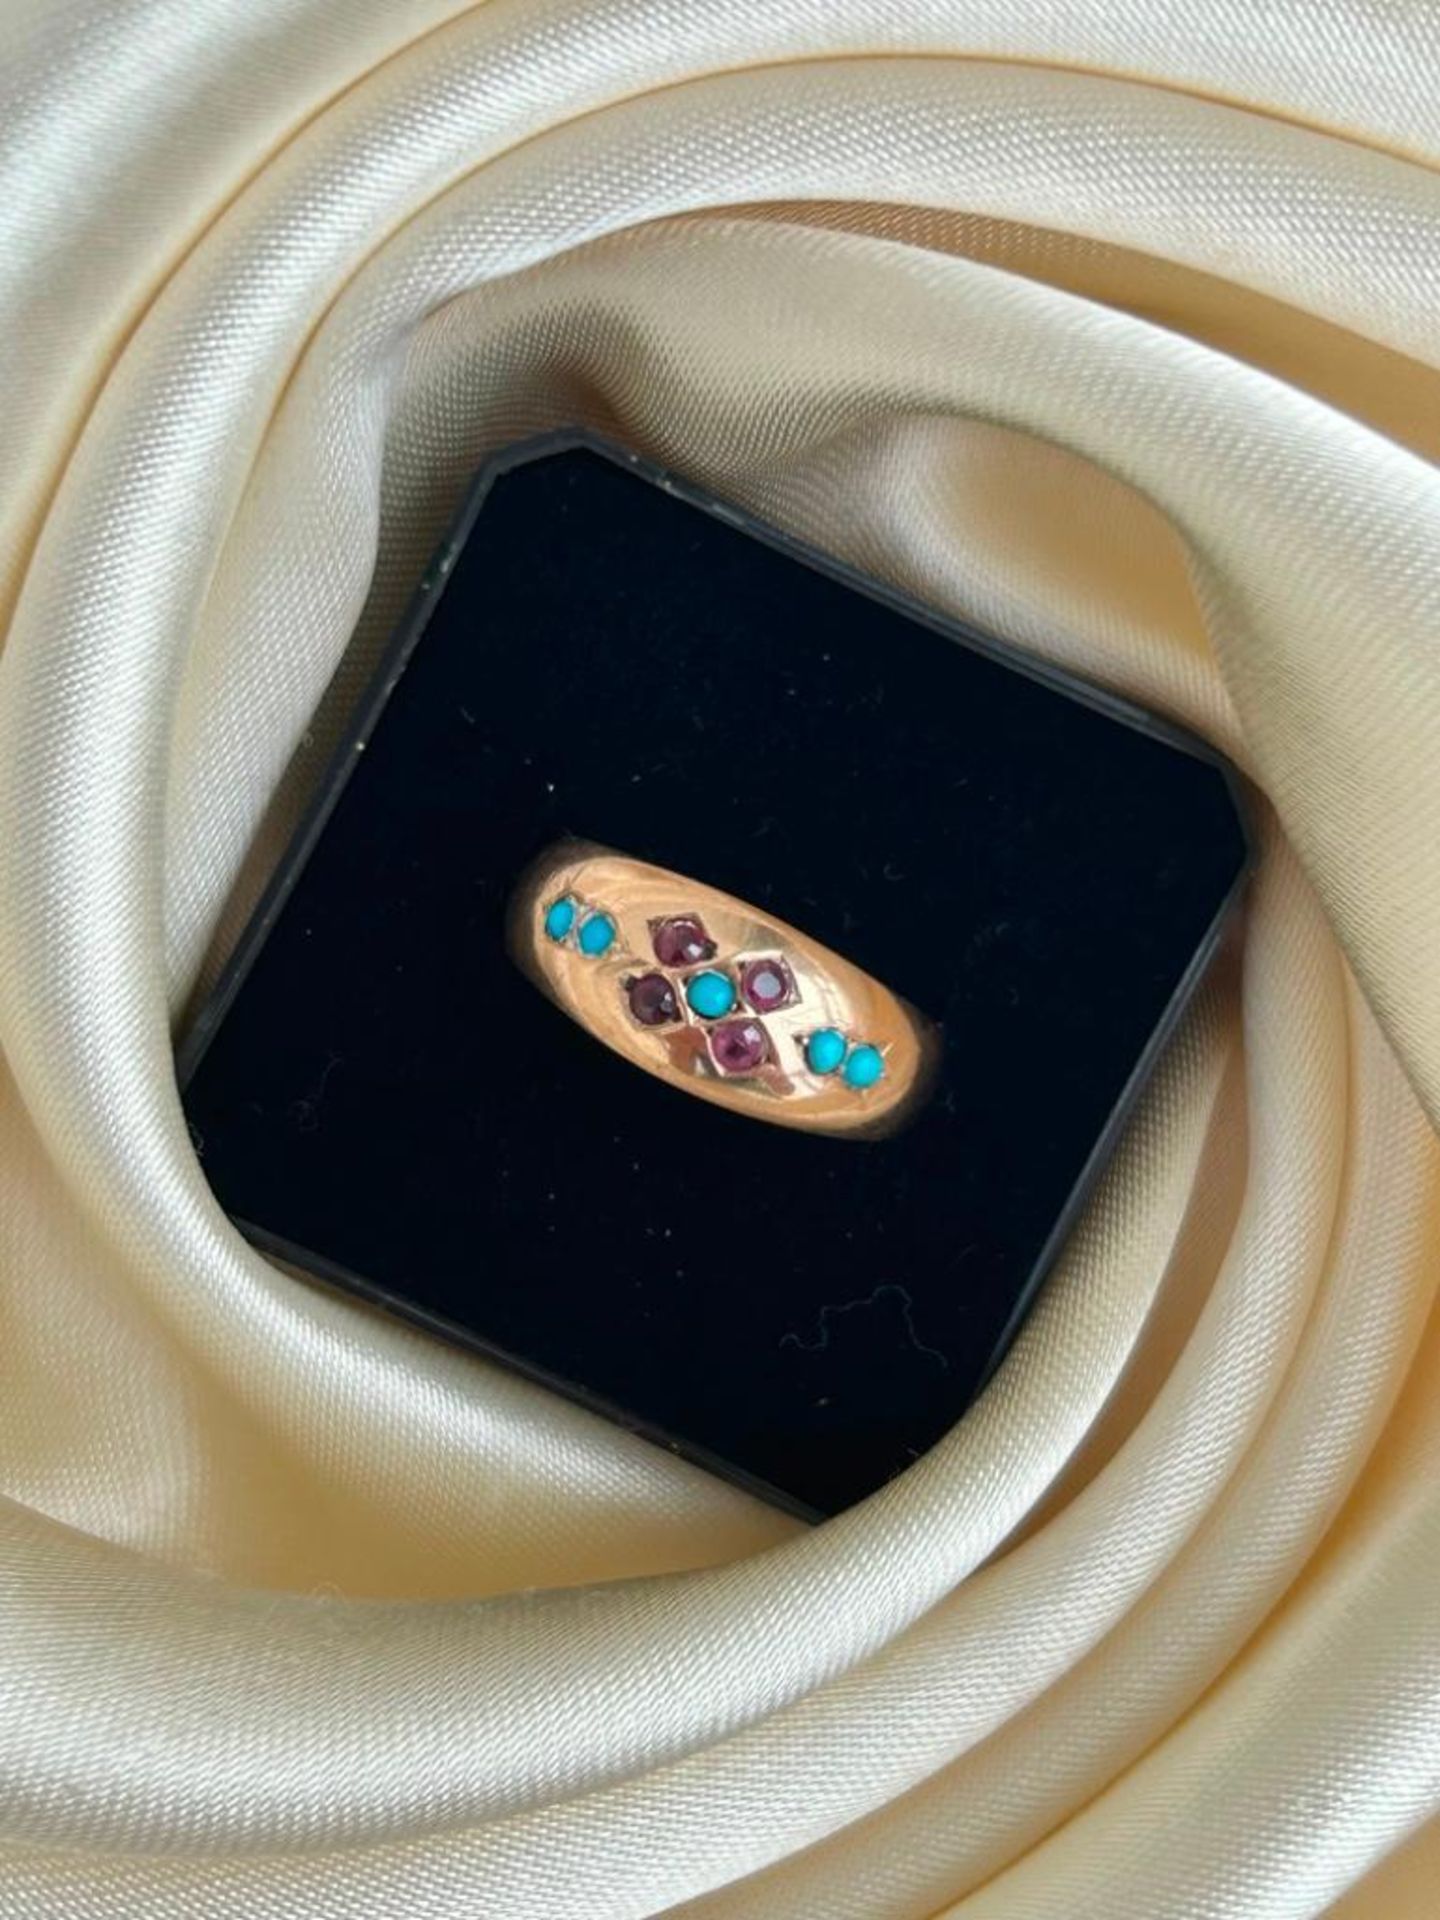 Unusual Antique 9ct Gold Turquoise Ring - Image 6 of 6